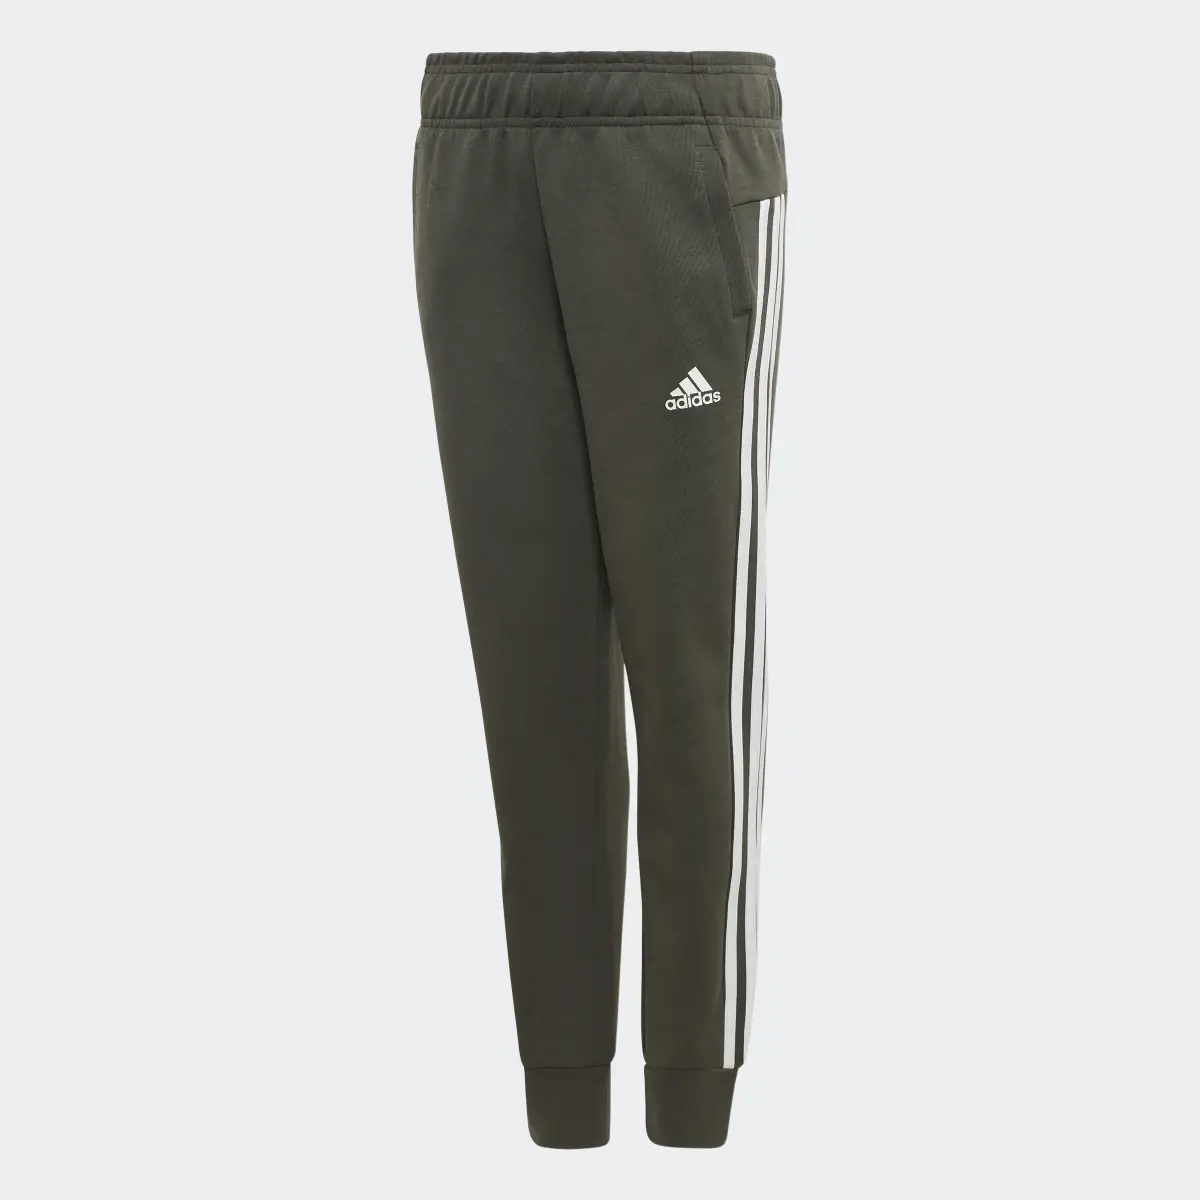 Adidas Must Haves 3-Stripes Pants. 1